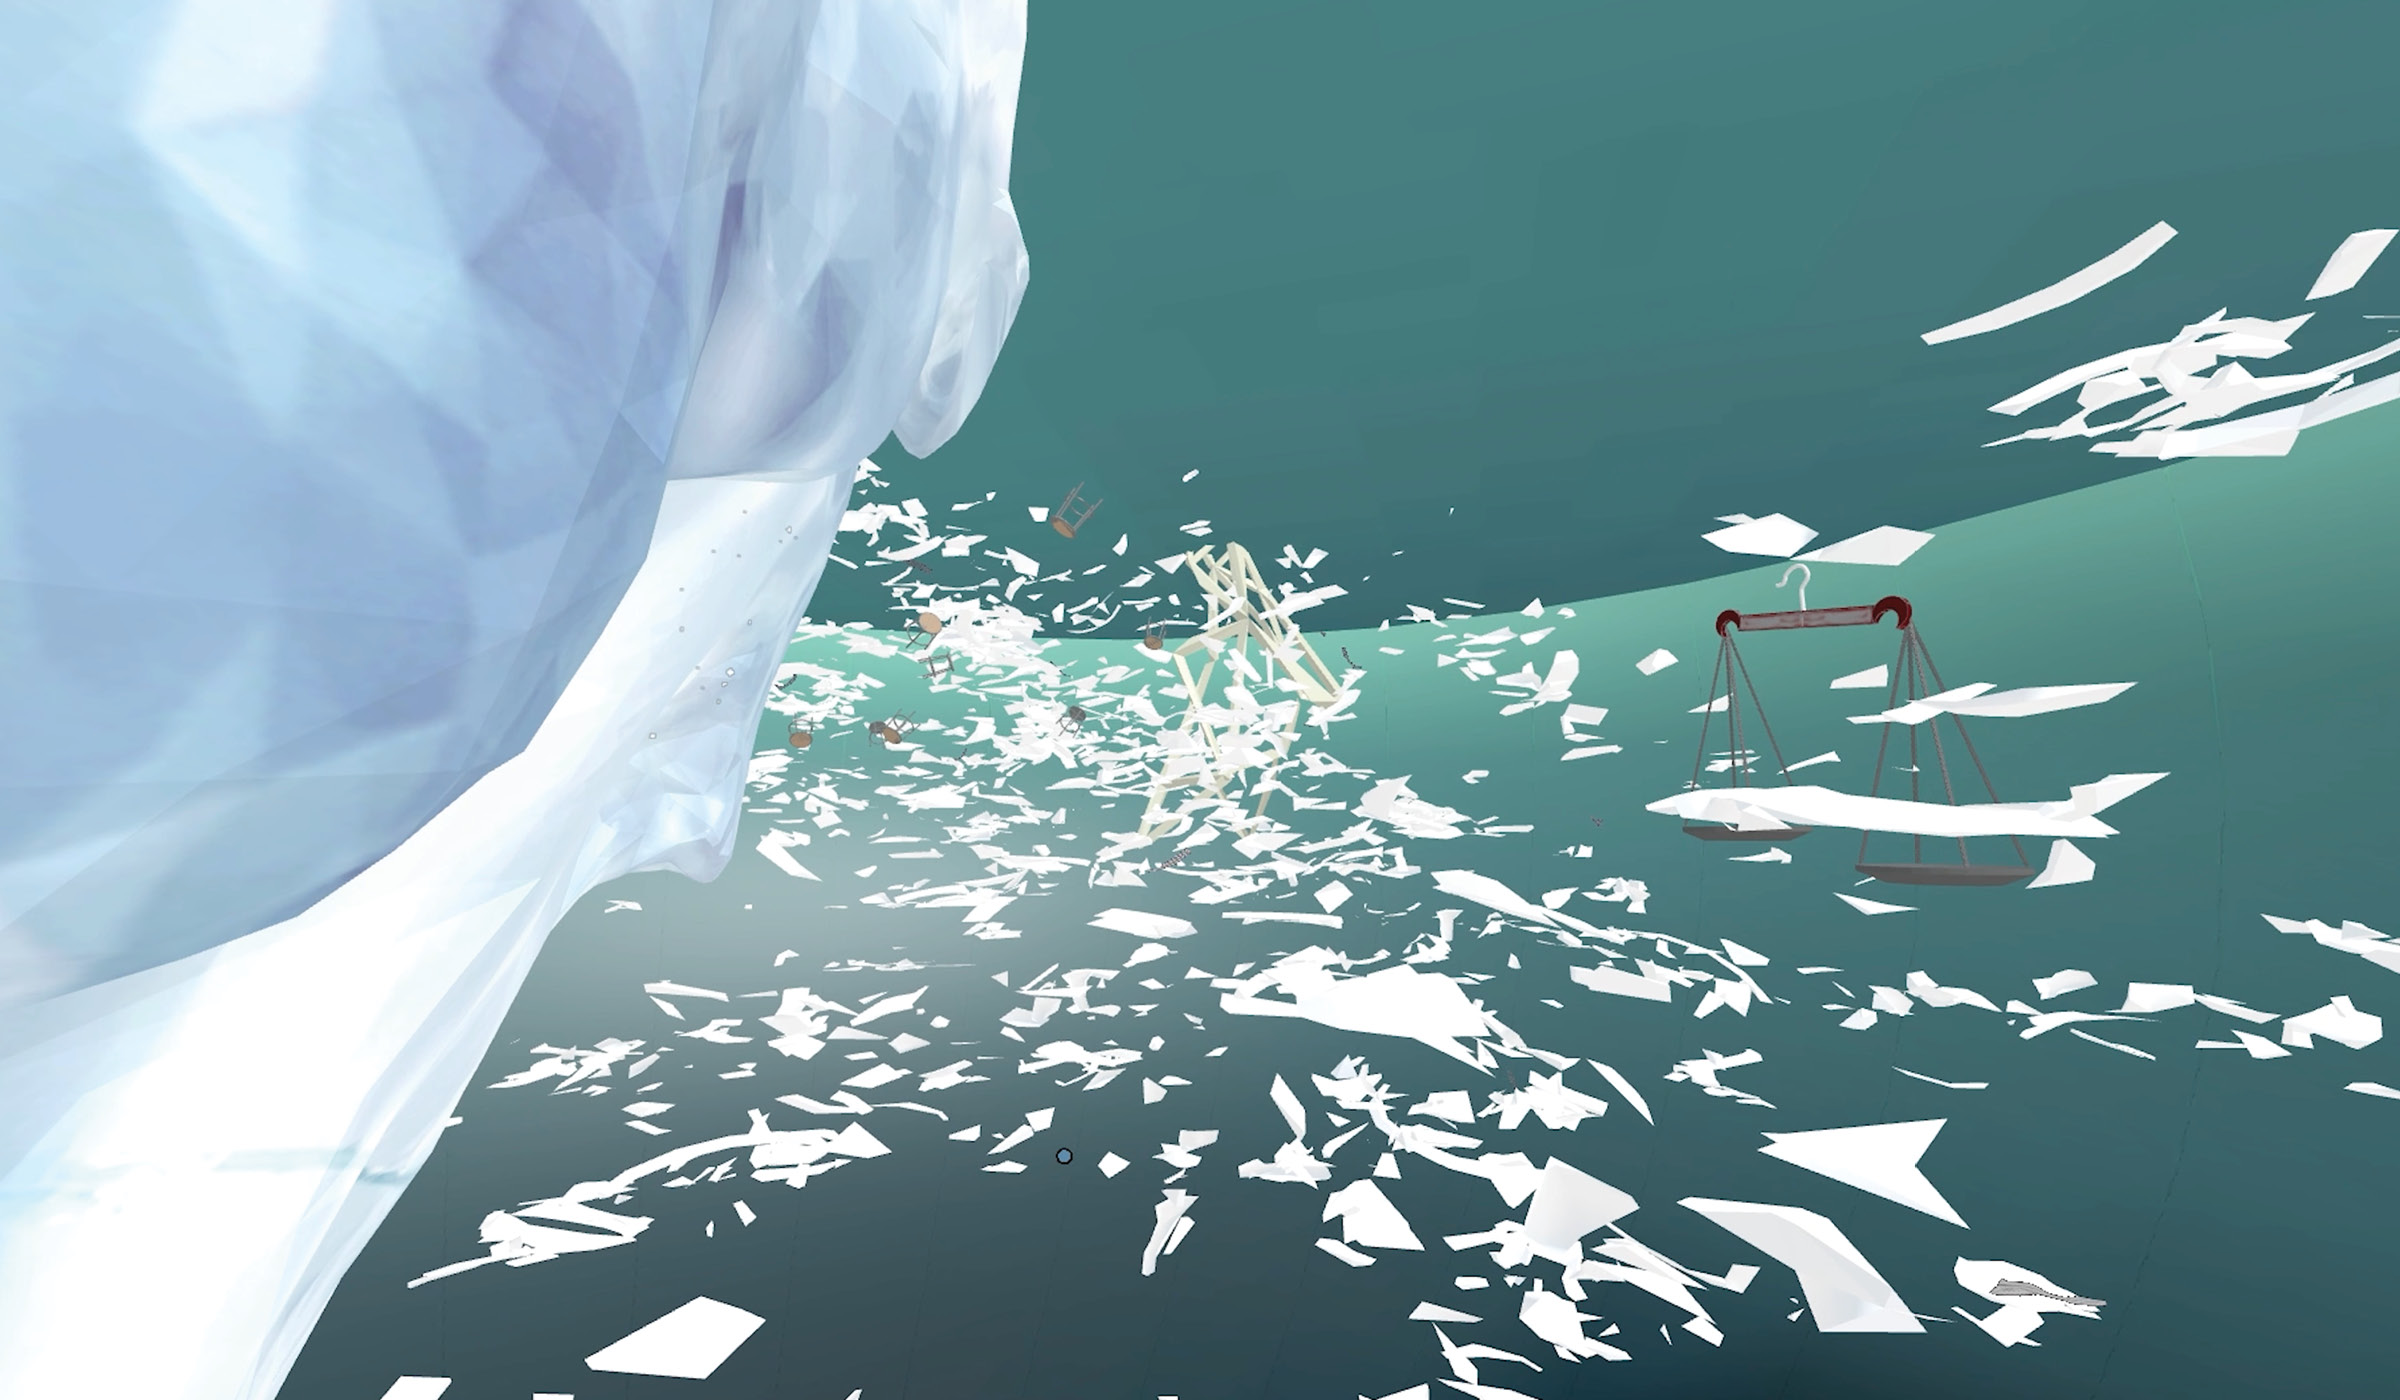 Screen grab of the virtual artwork refuge (SIREN), by nichola feldman-kiss & Matheuszik with SPATIAL-ESK. The image shows an underwater landscape with an iceberg, floating scales, and a far away architectural structure surrounded by floating stools.